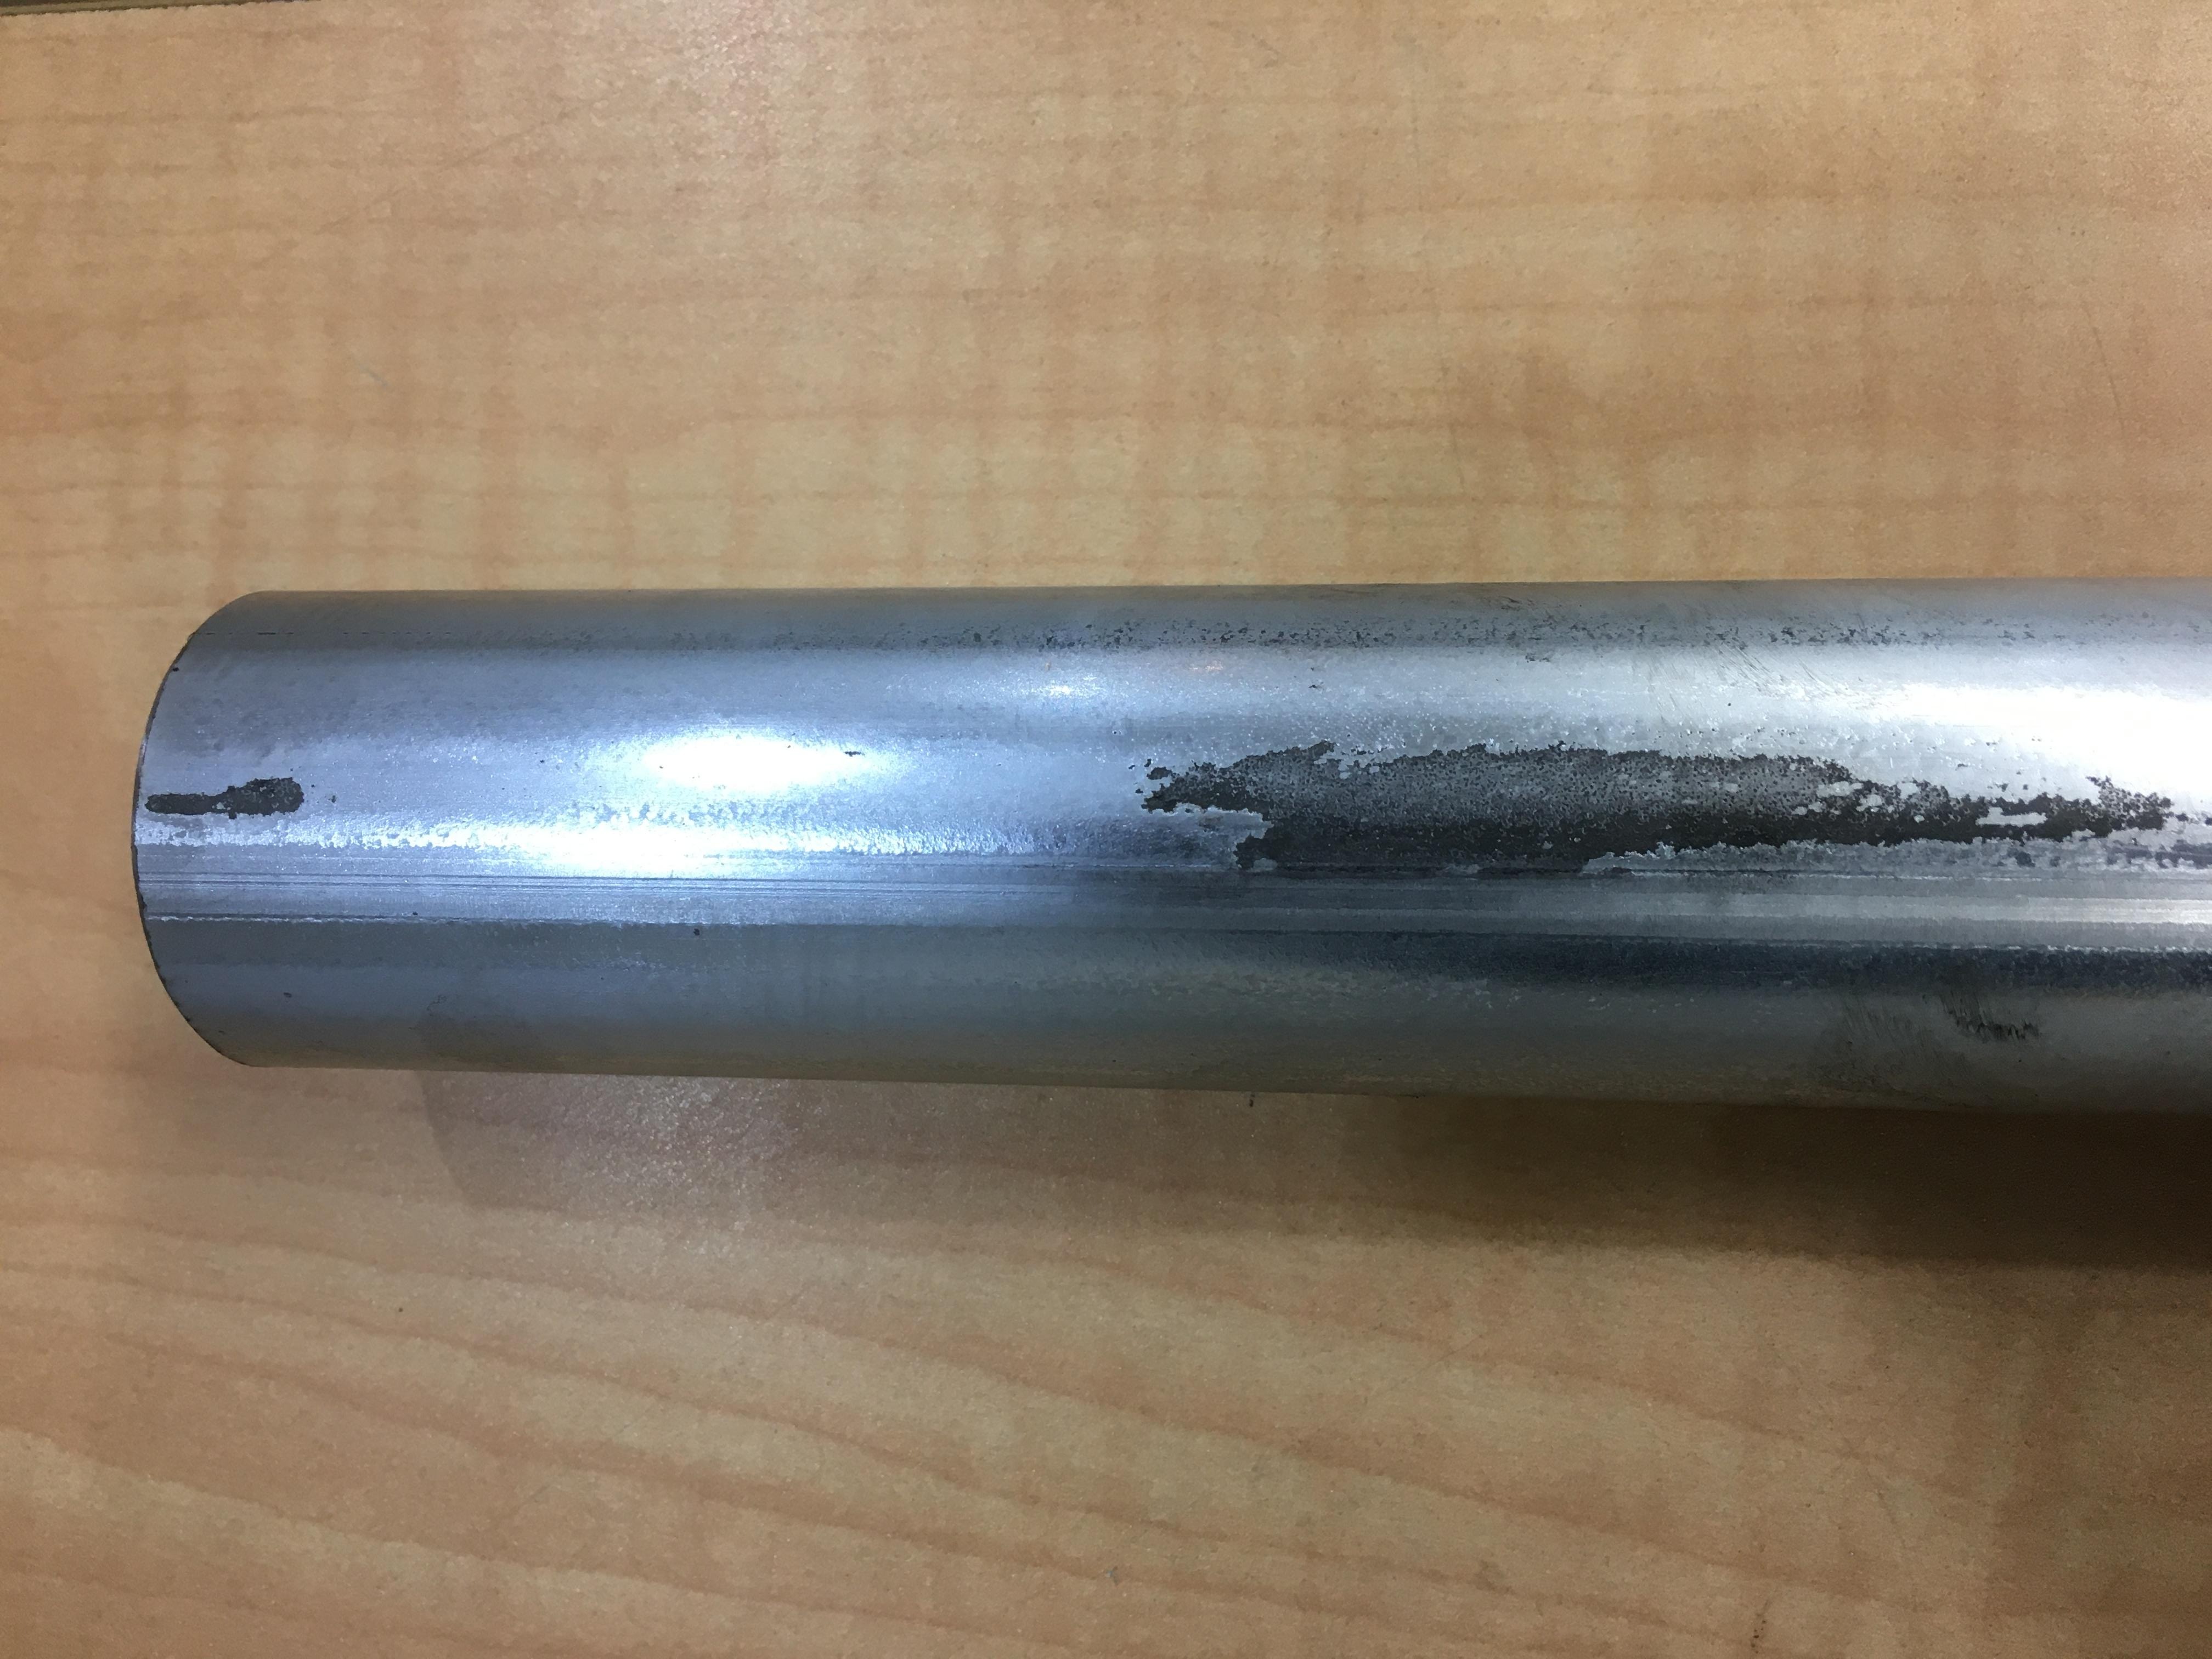 Galvanizing Defect on a Steel Tube